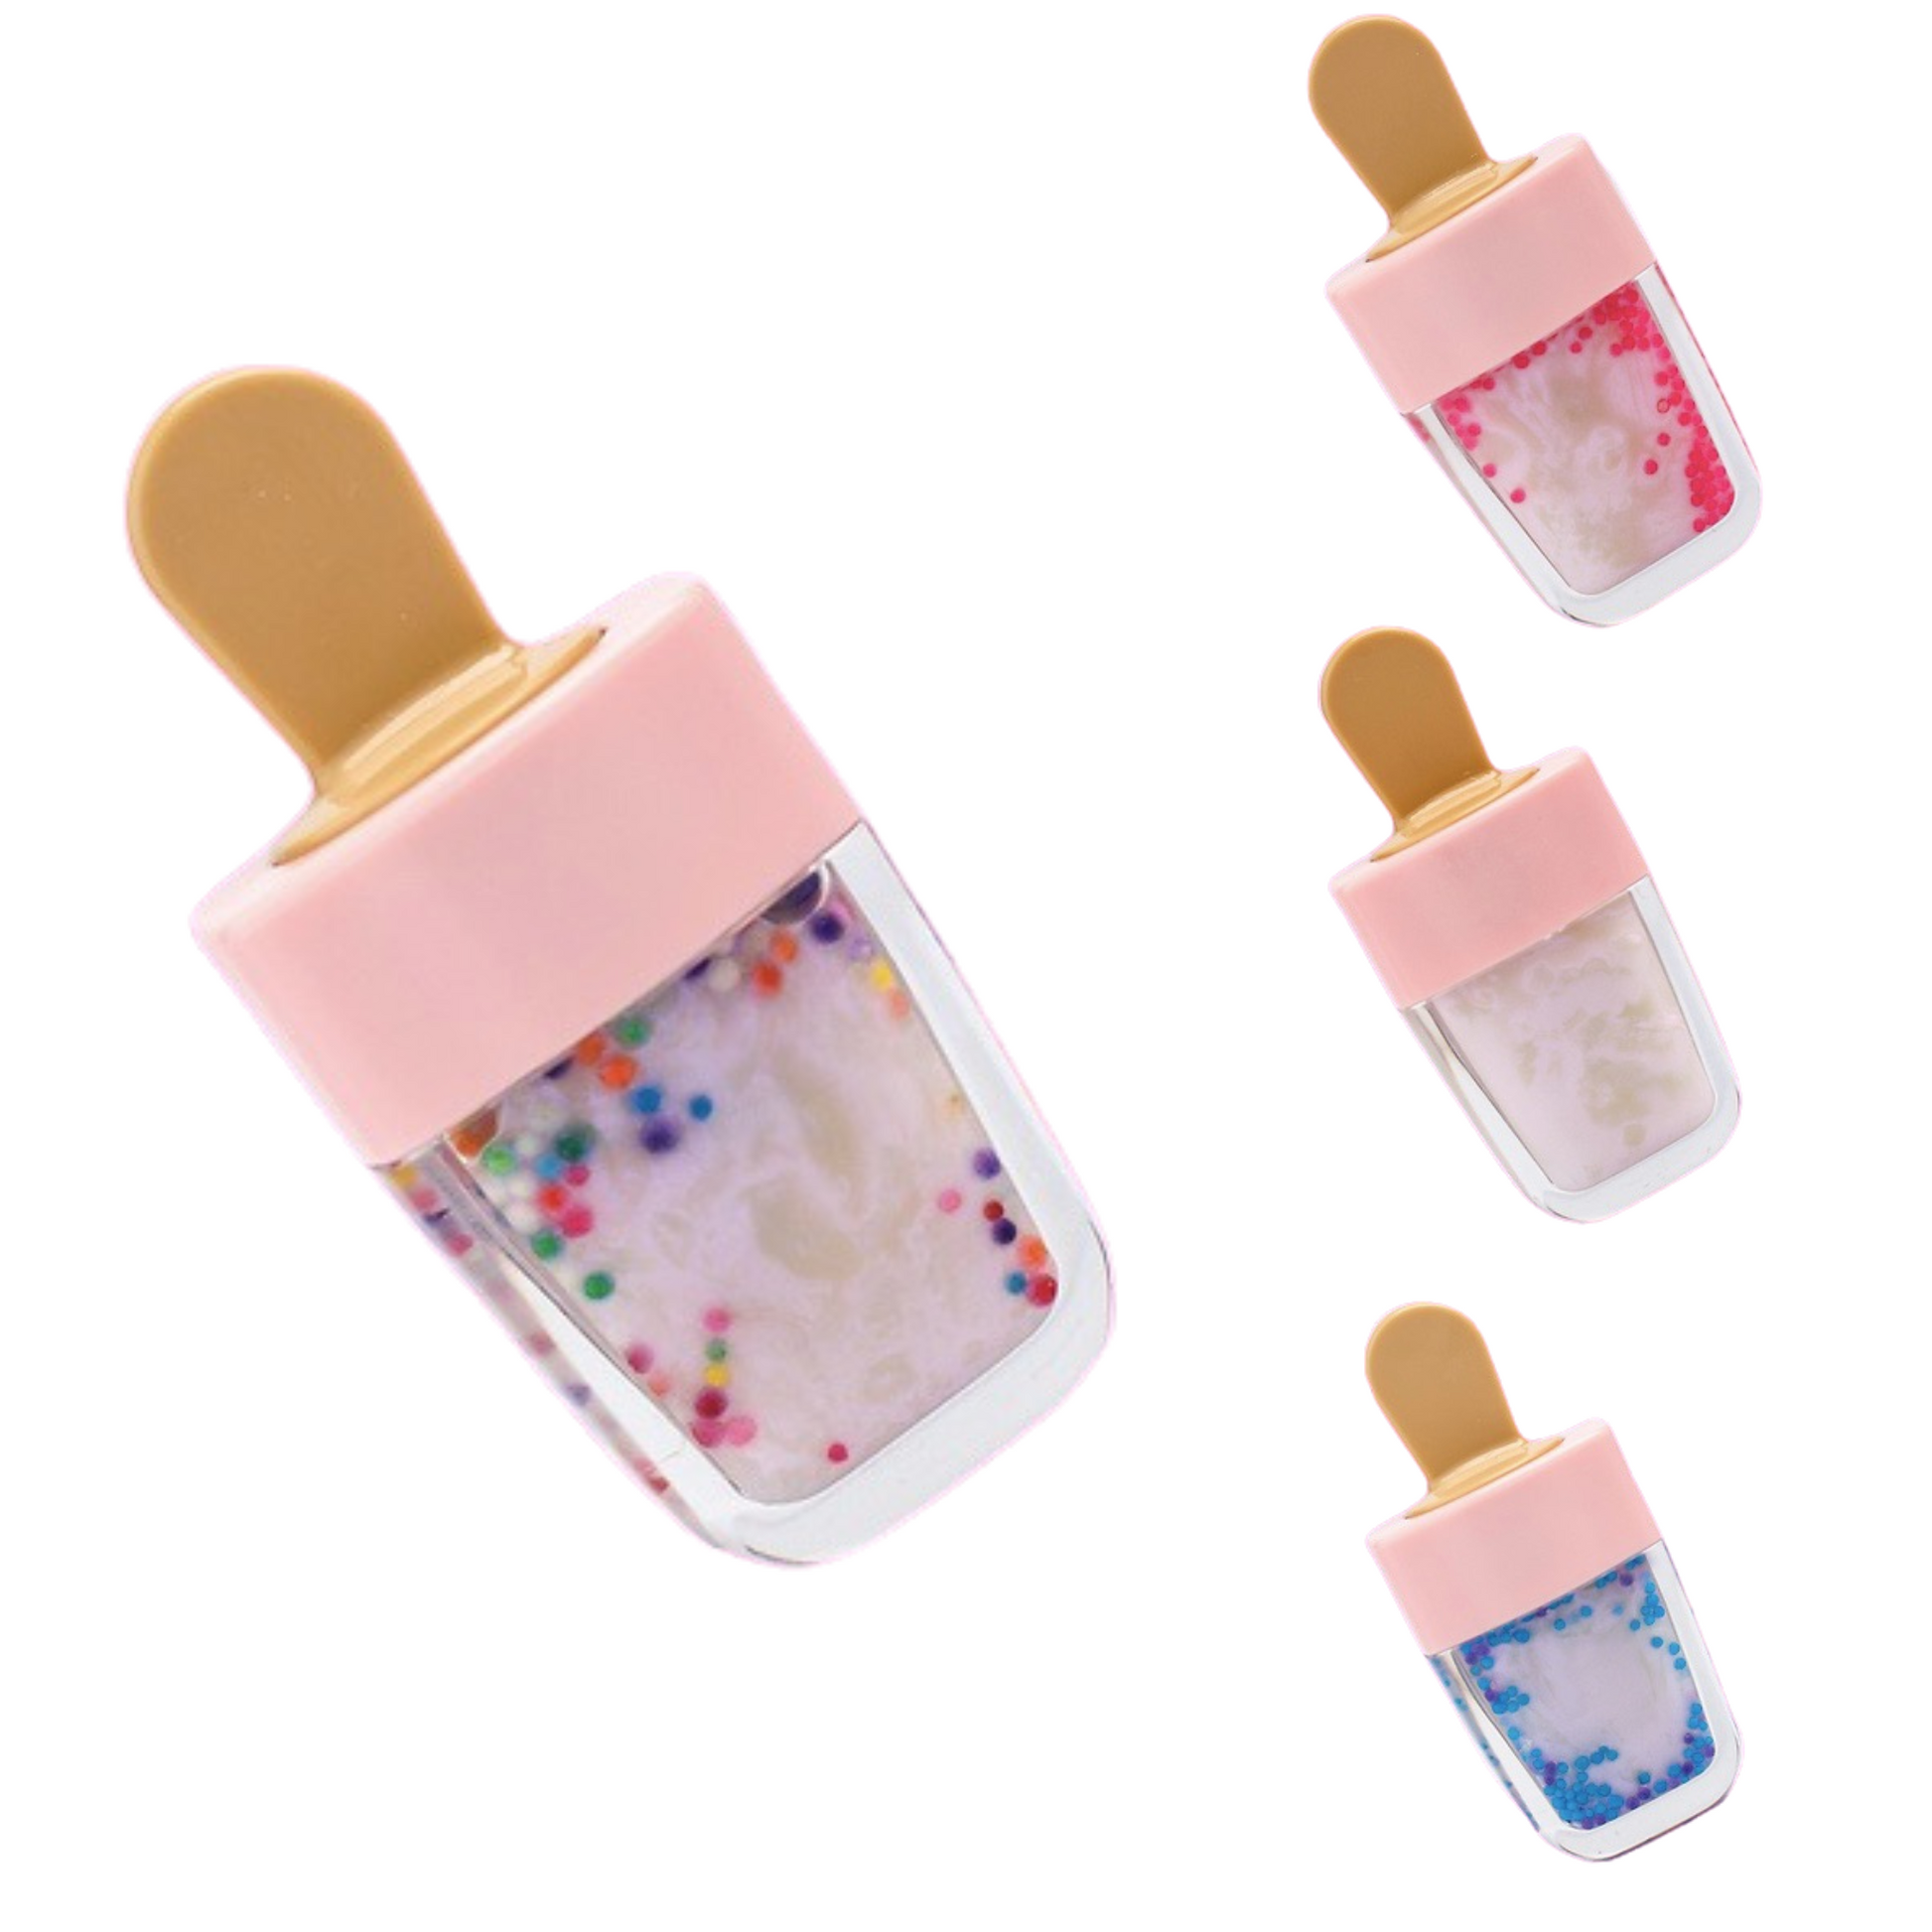 Expertly crafted in the USA, Frosty Pop Lip Gloss is the perfect blend of natural ingredients that nourish your lips. Featuring a sweet popsicle container, it adds a fun and fabulous touch to your beauty routine. Choose from Original, Rainbow, Unicorn, and Mermaid for a personalized touch.